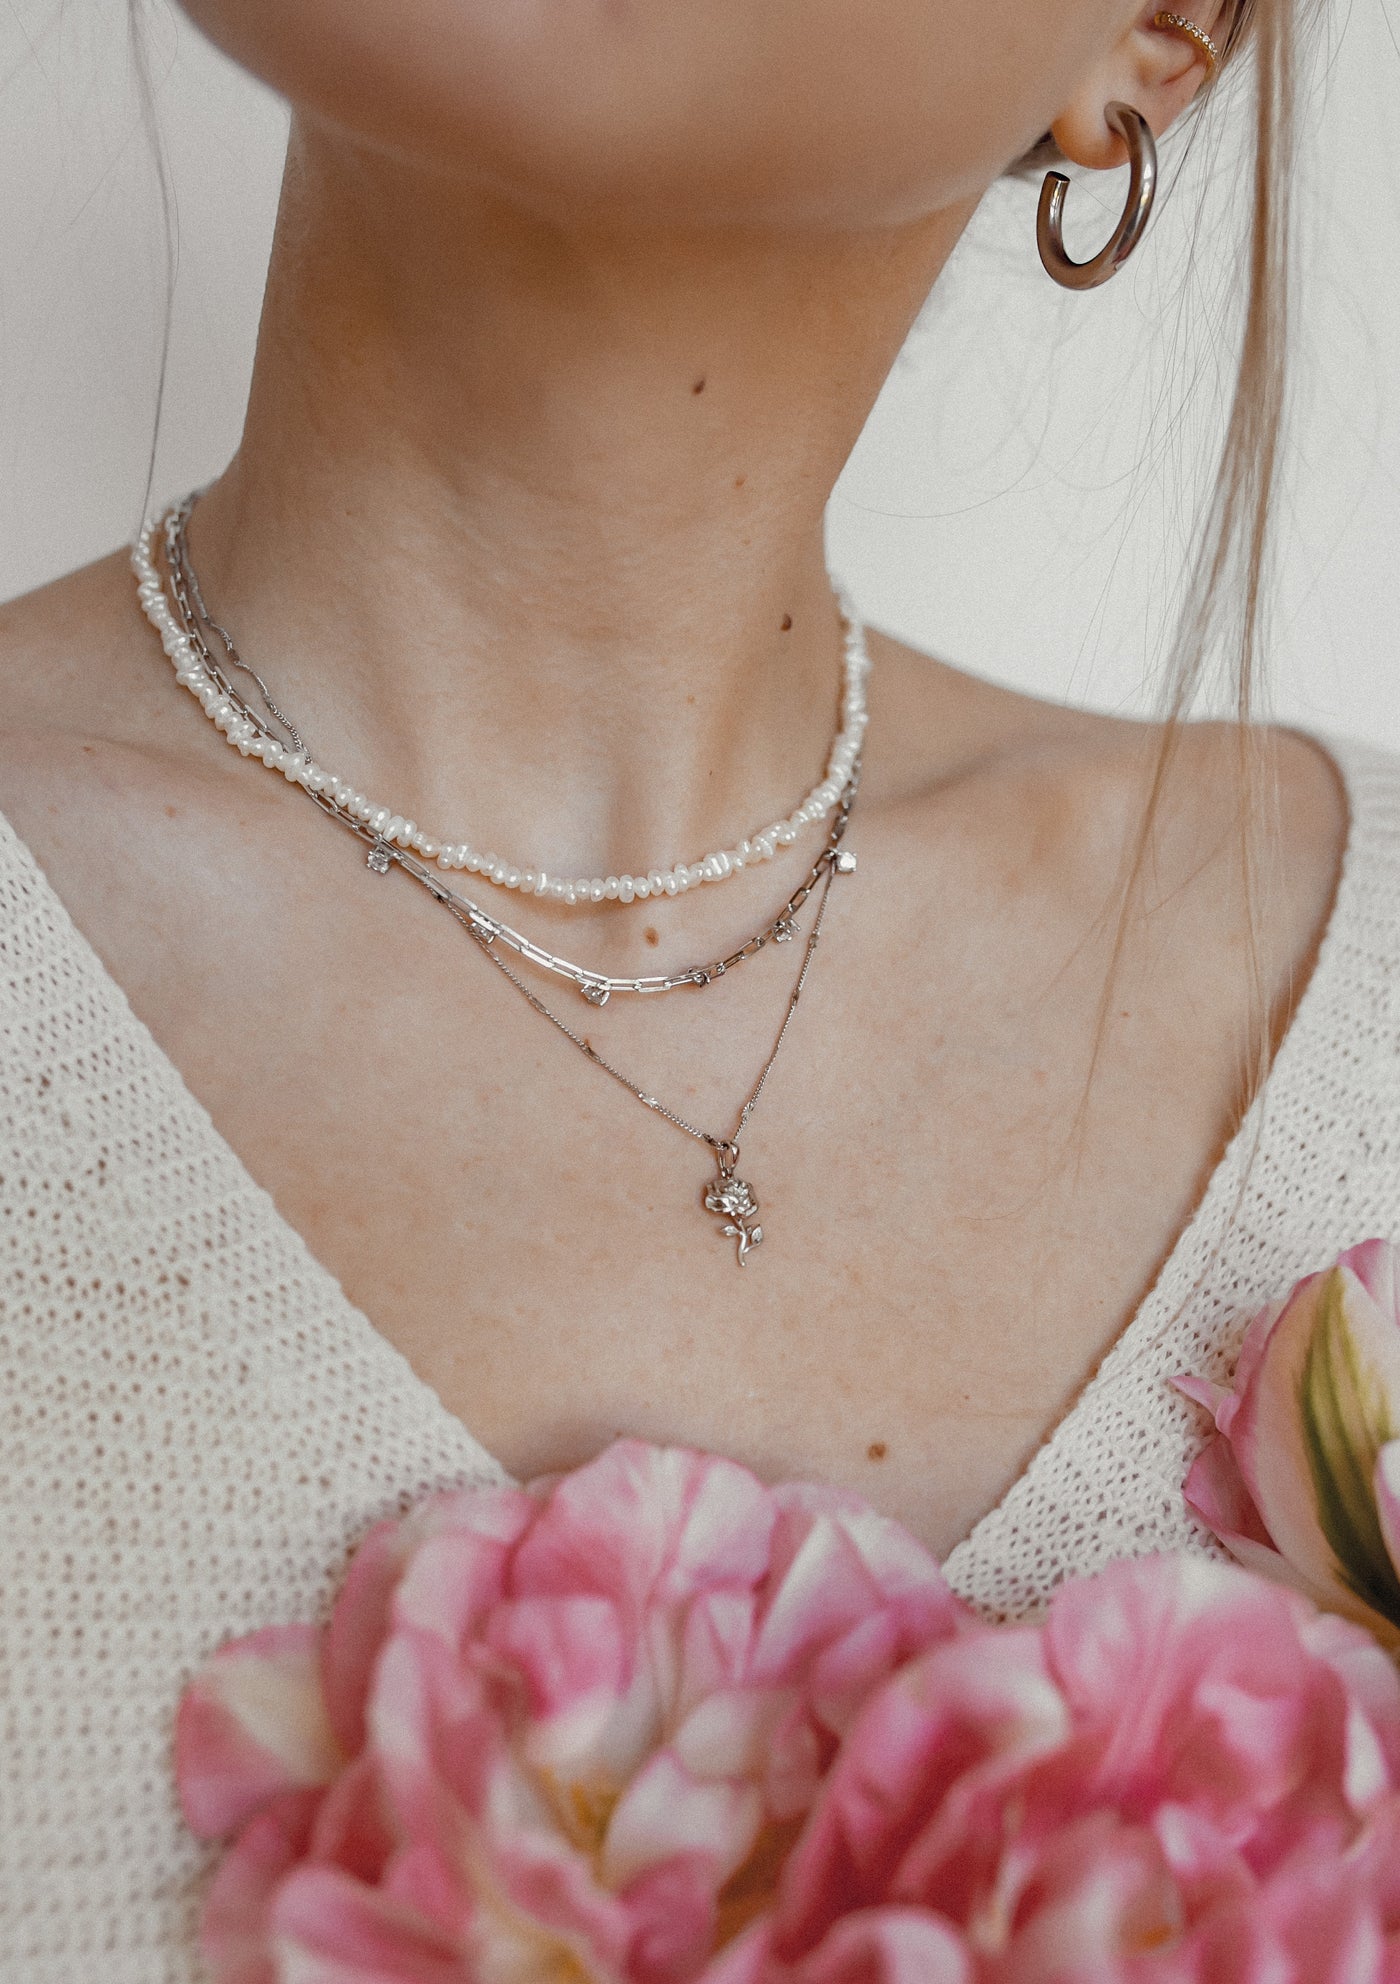 Delicate Starburst Chain Necklace Sterling Silver